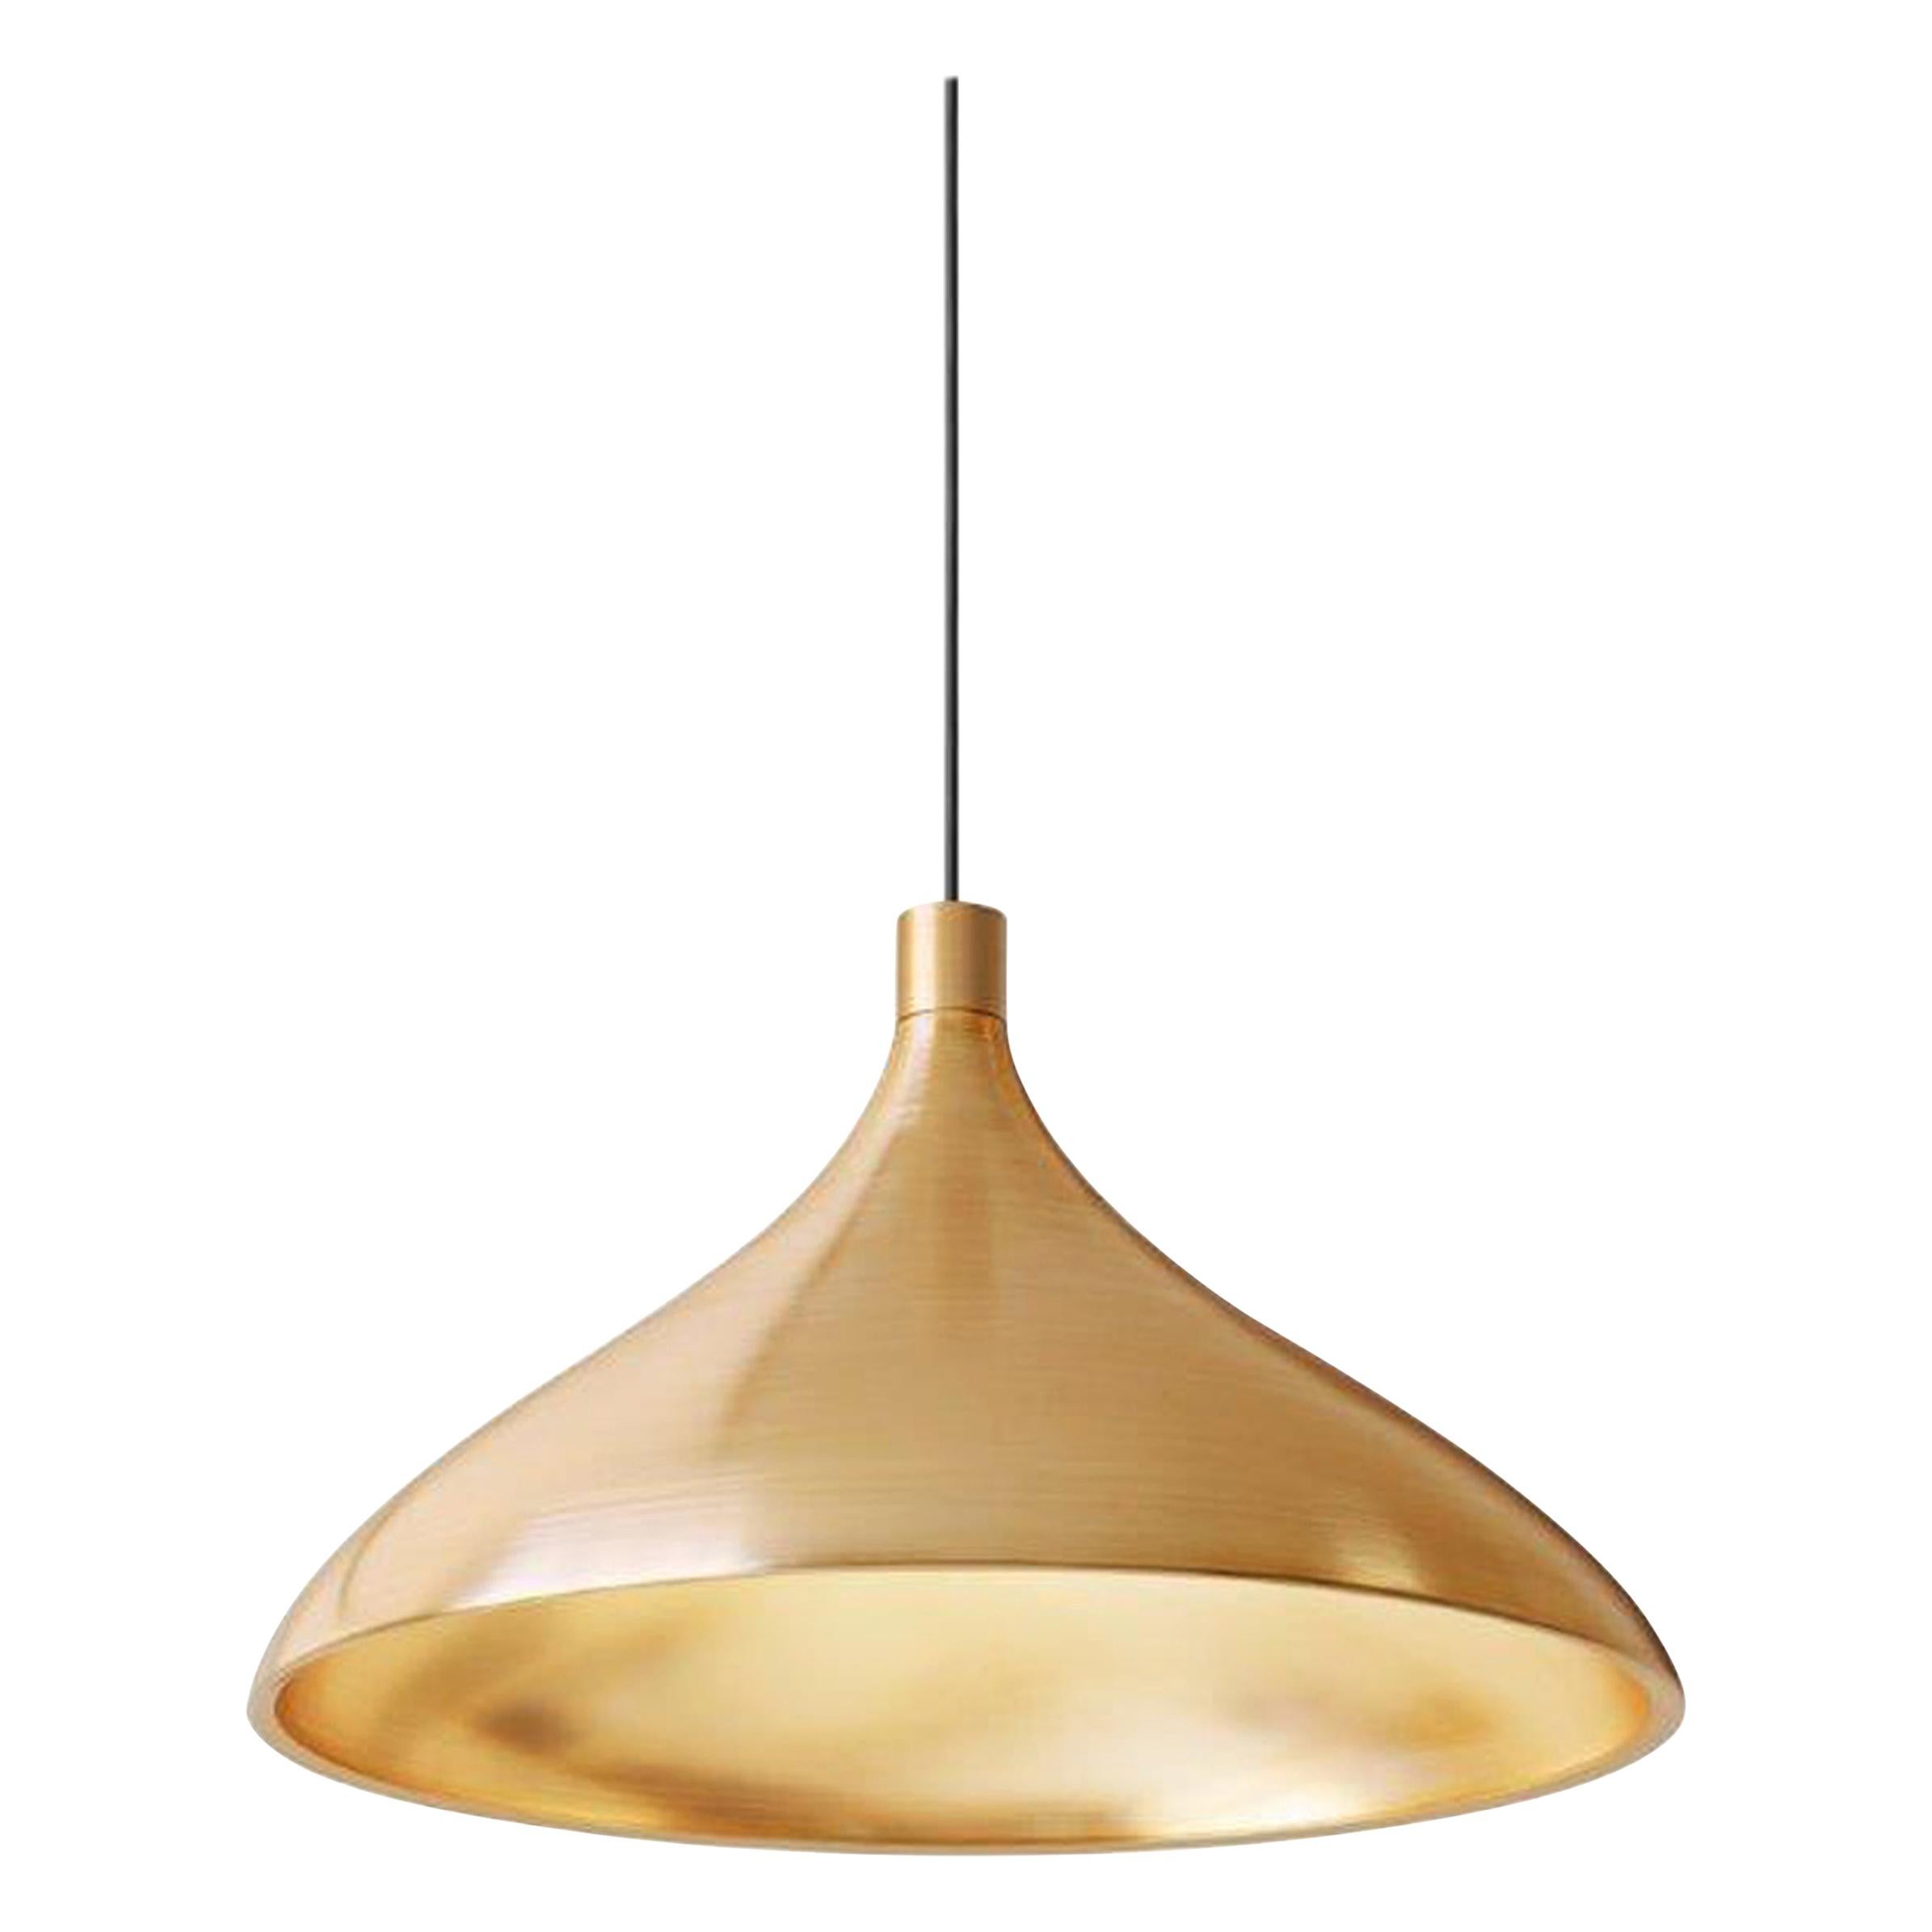 Swell XL Single Wide LED Pendant Lamp in Brass by Pablo Designs For Sale